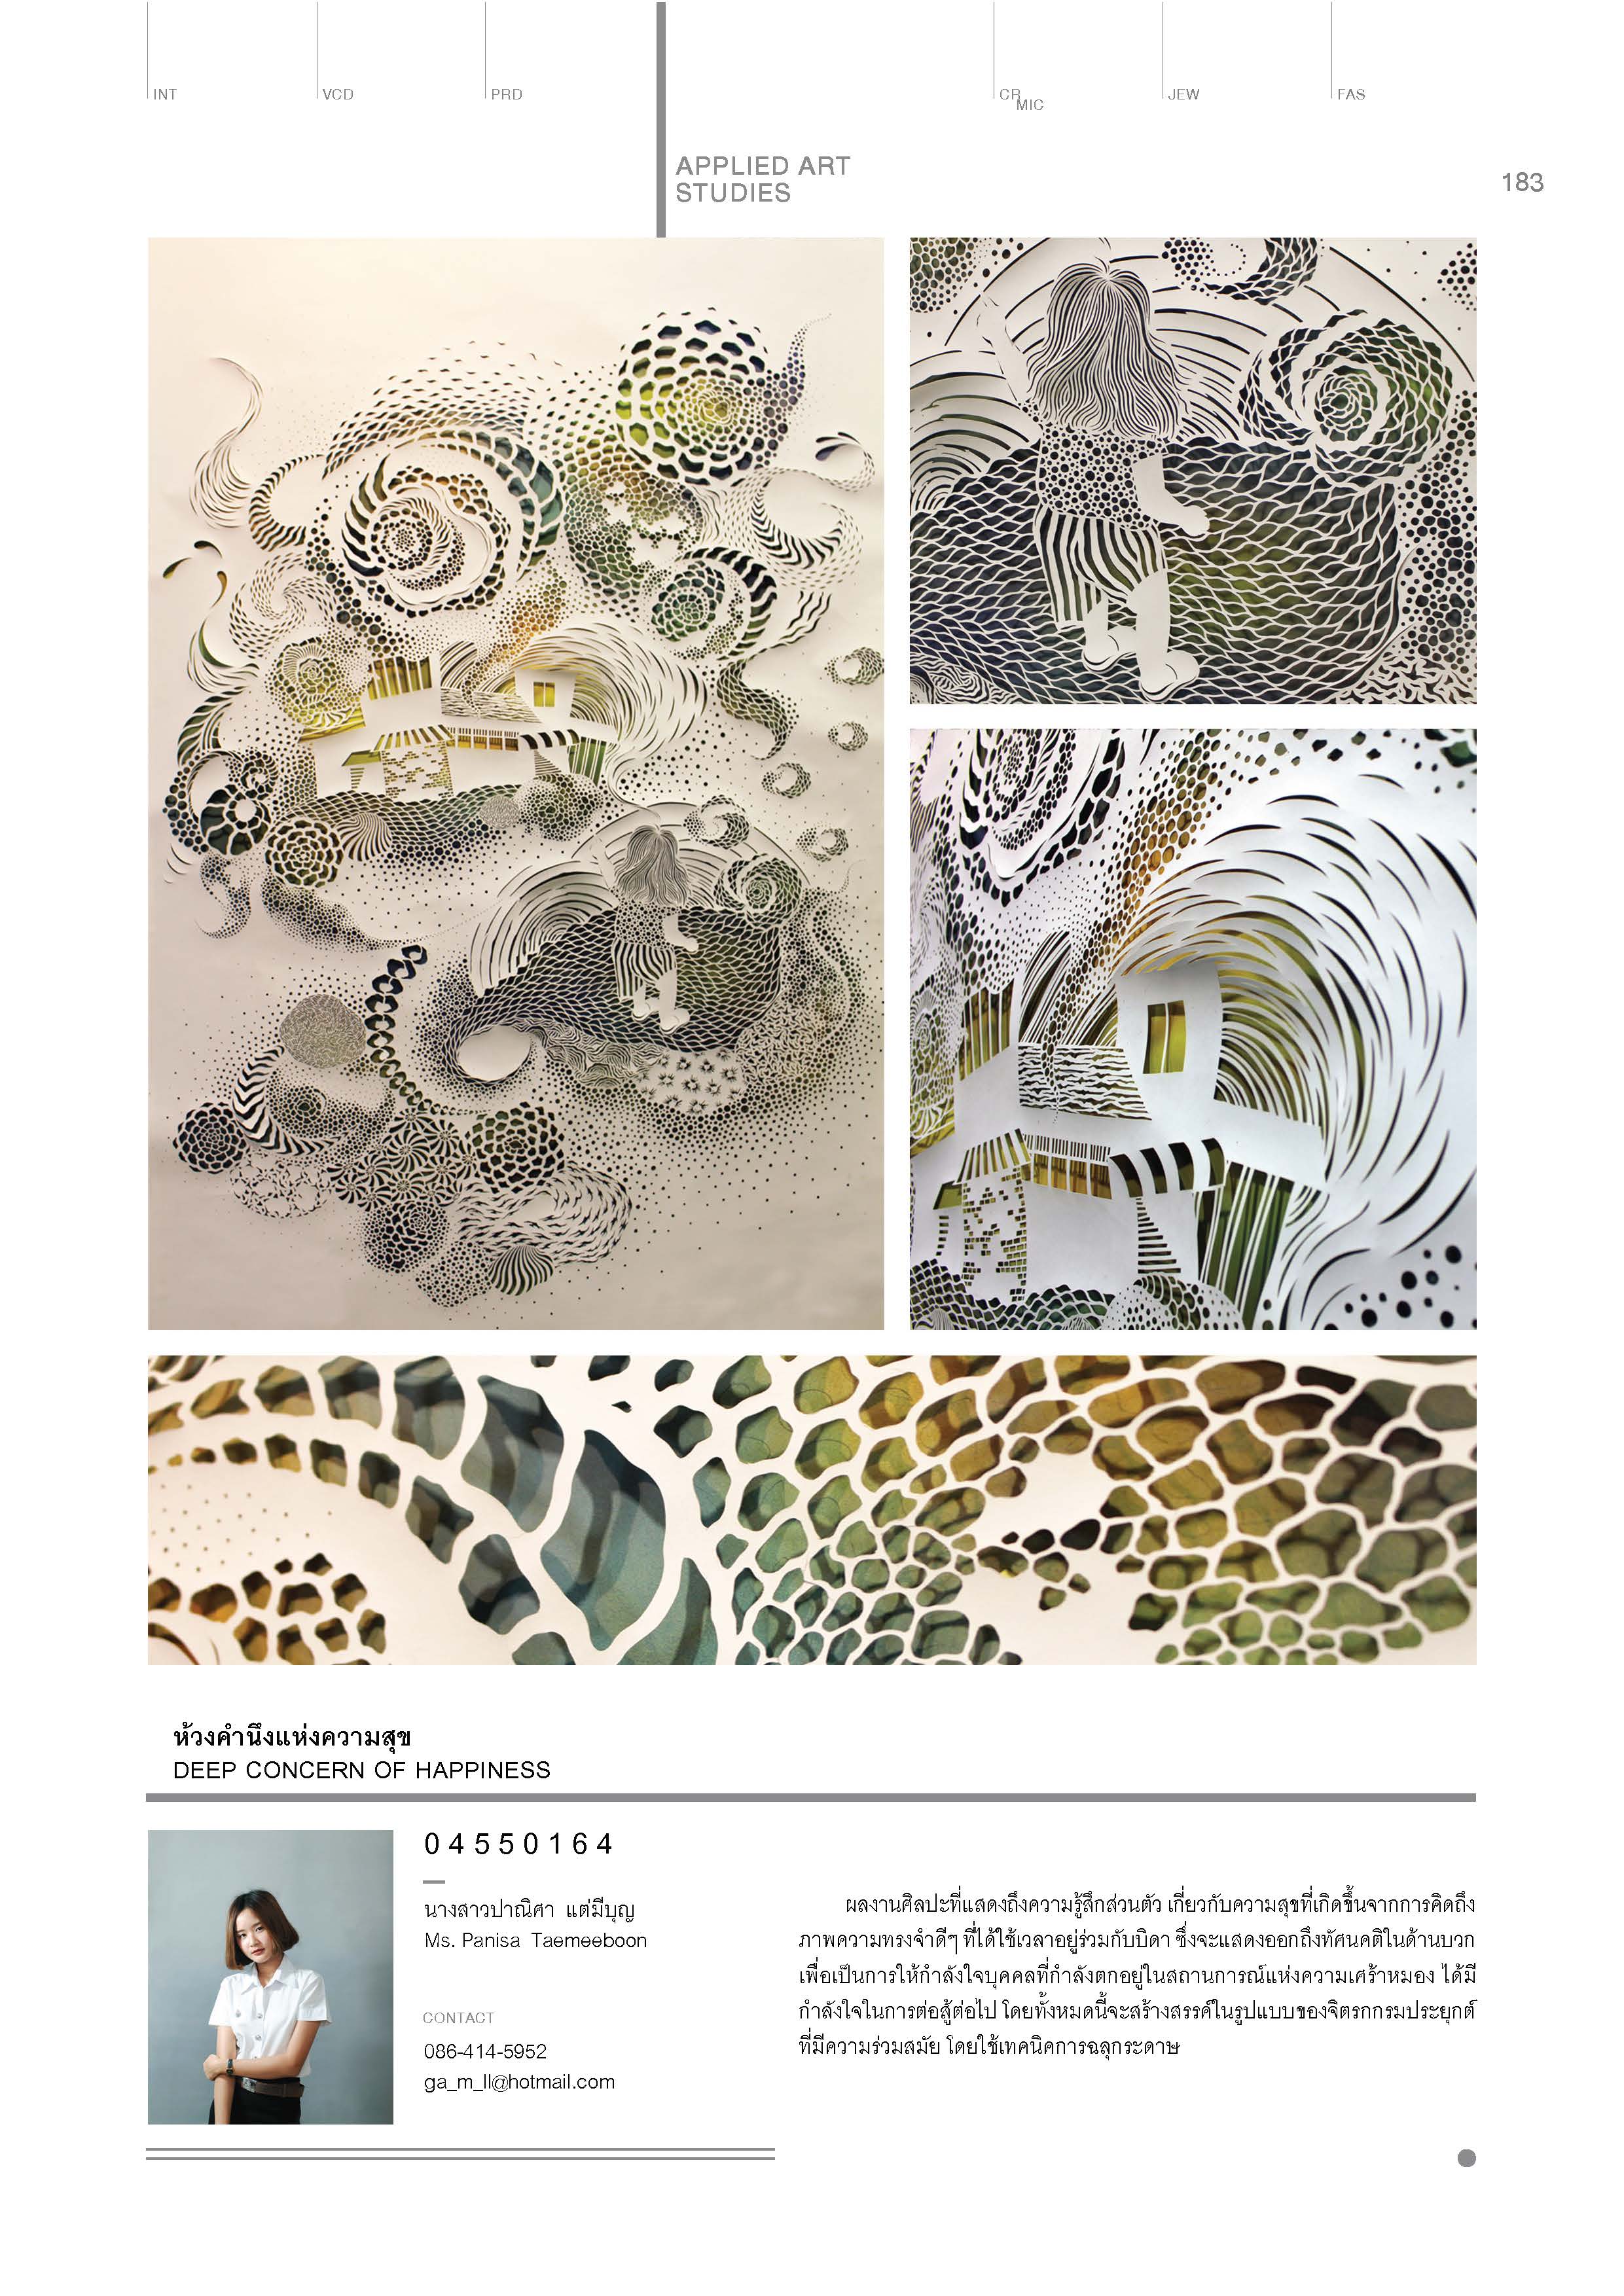 Photosynthesis-The46th_Art_Thesis_Exhibition_Decorative_Arts_Page_203